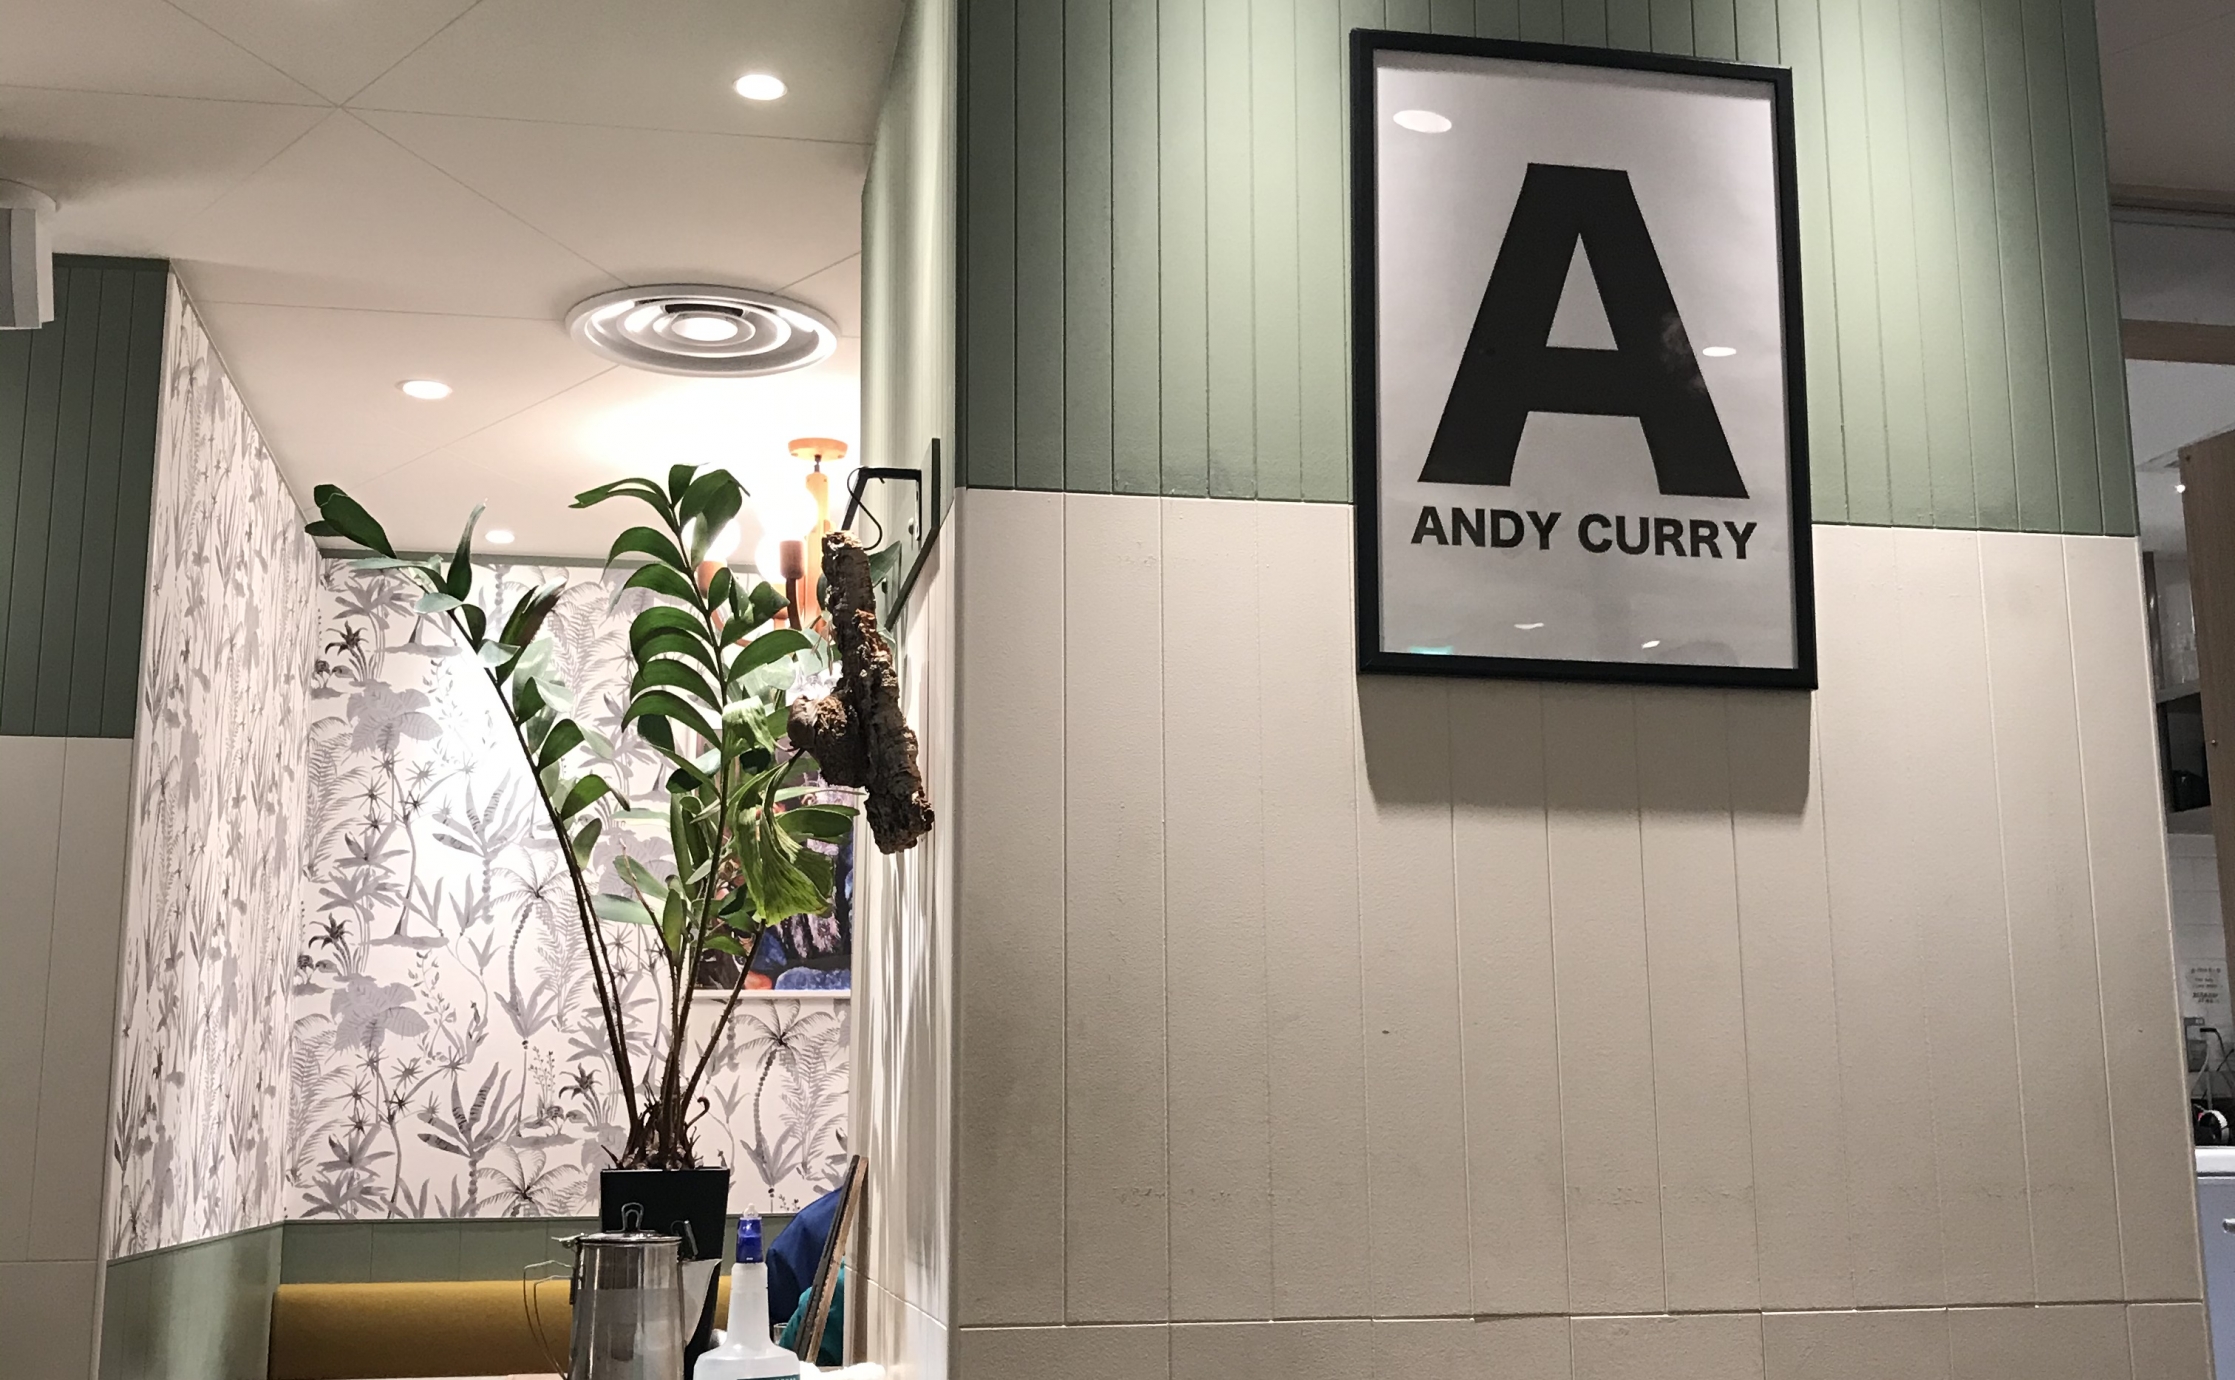 ANDY CURRY